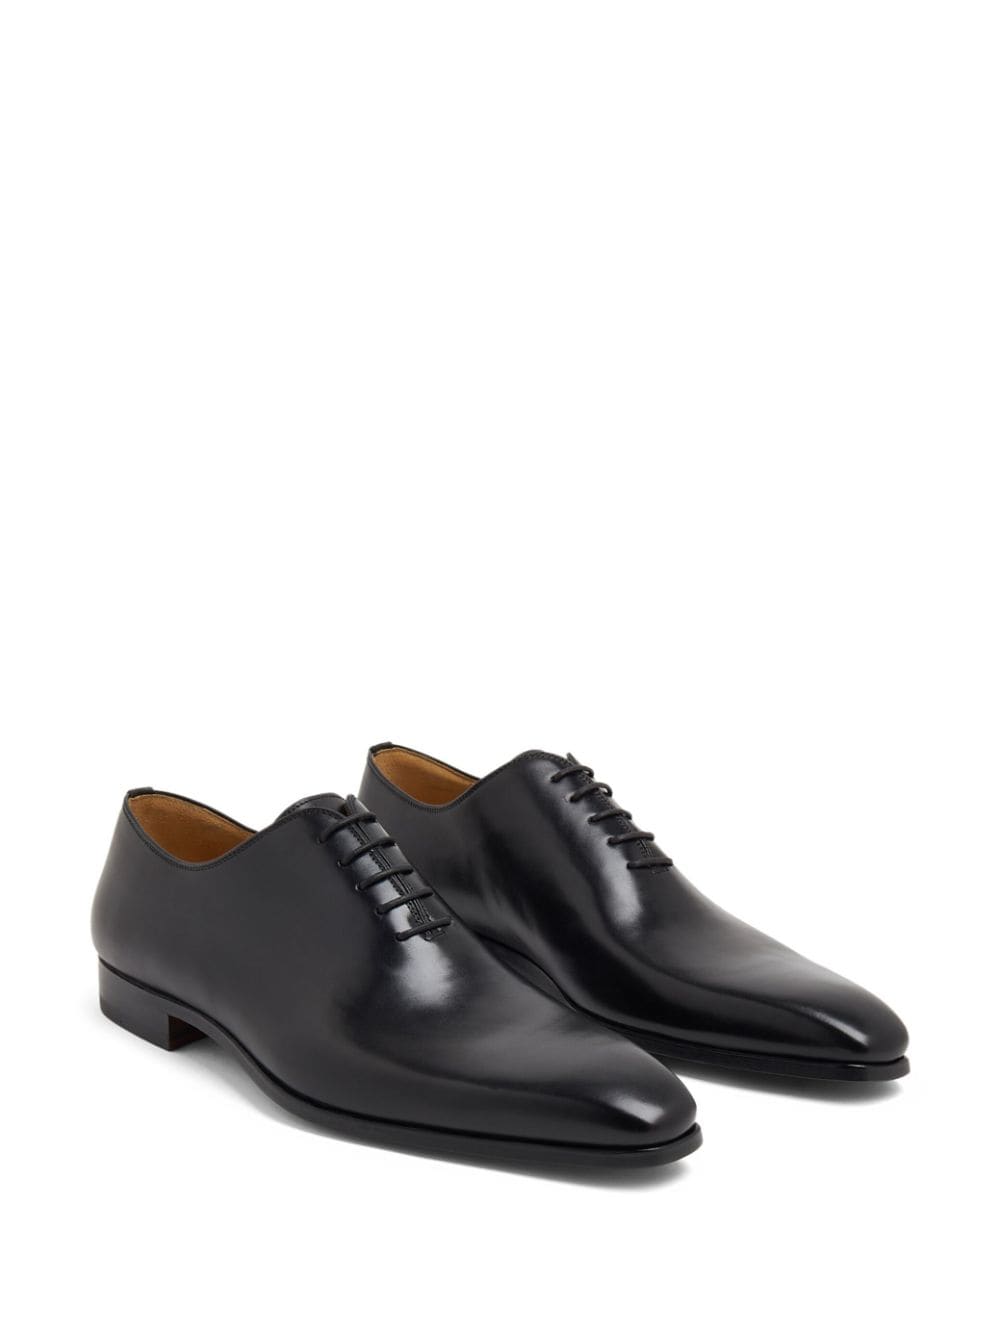 Shop Magnanni Almond-toe Leather Oxford Shoes In Black